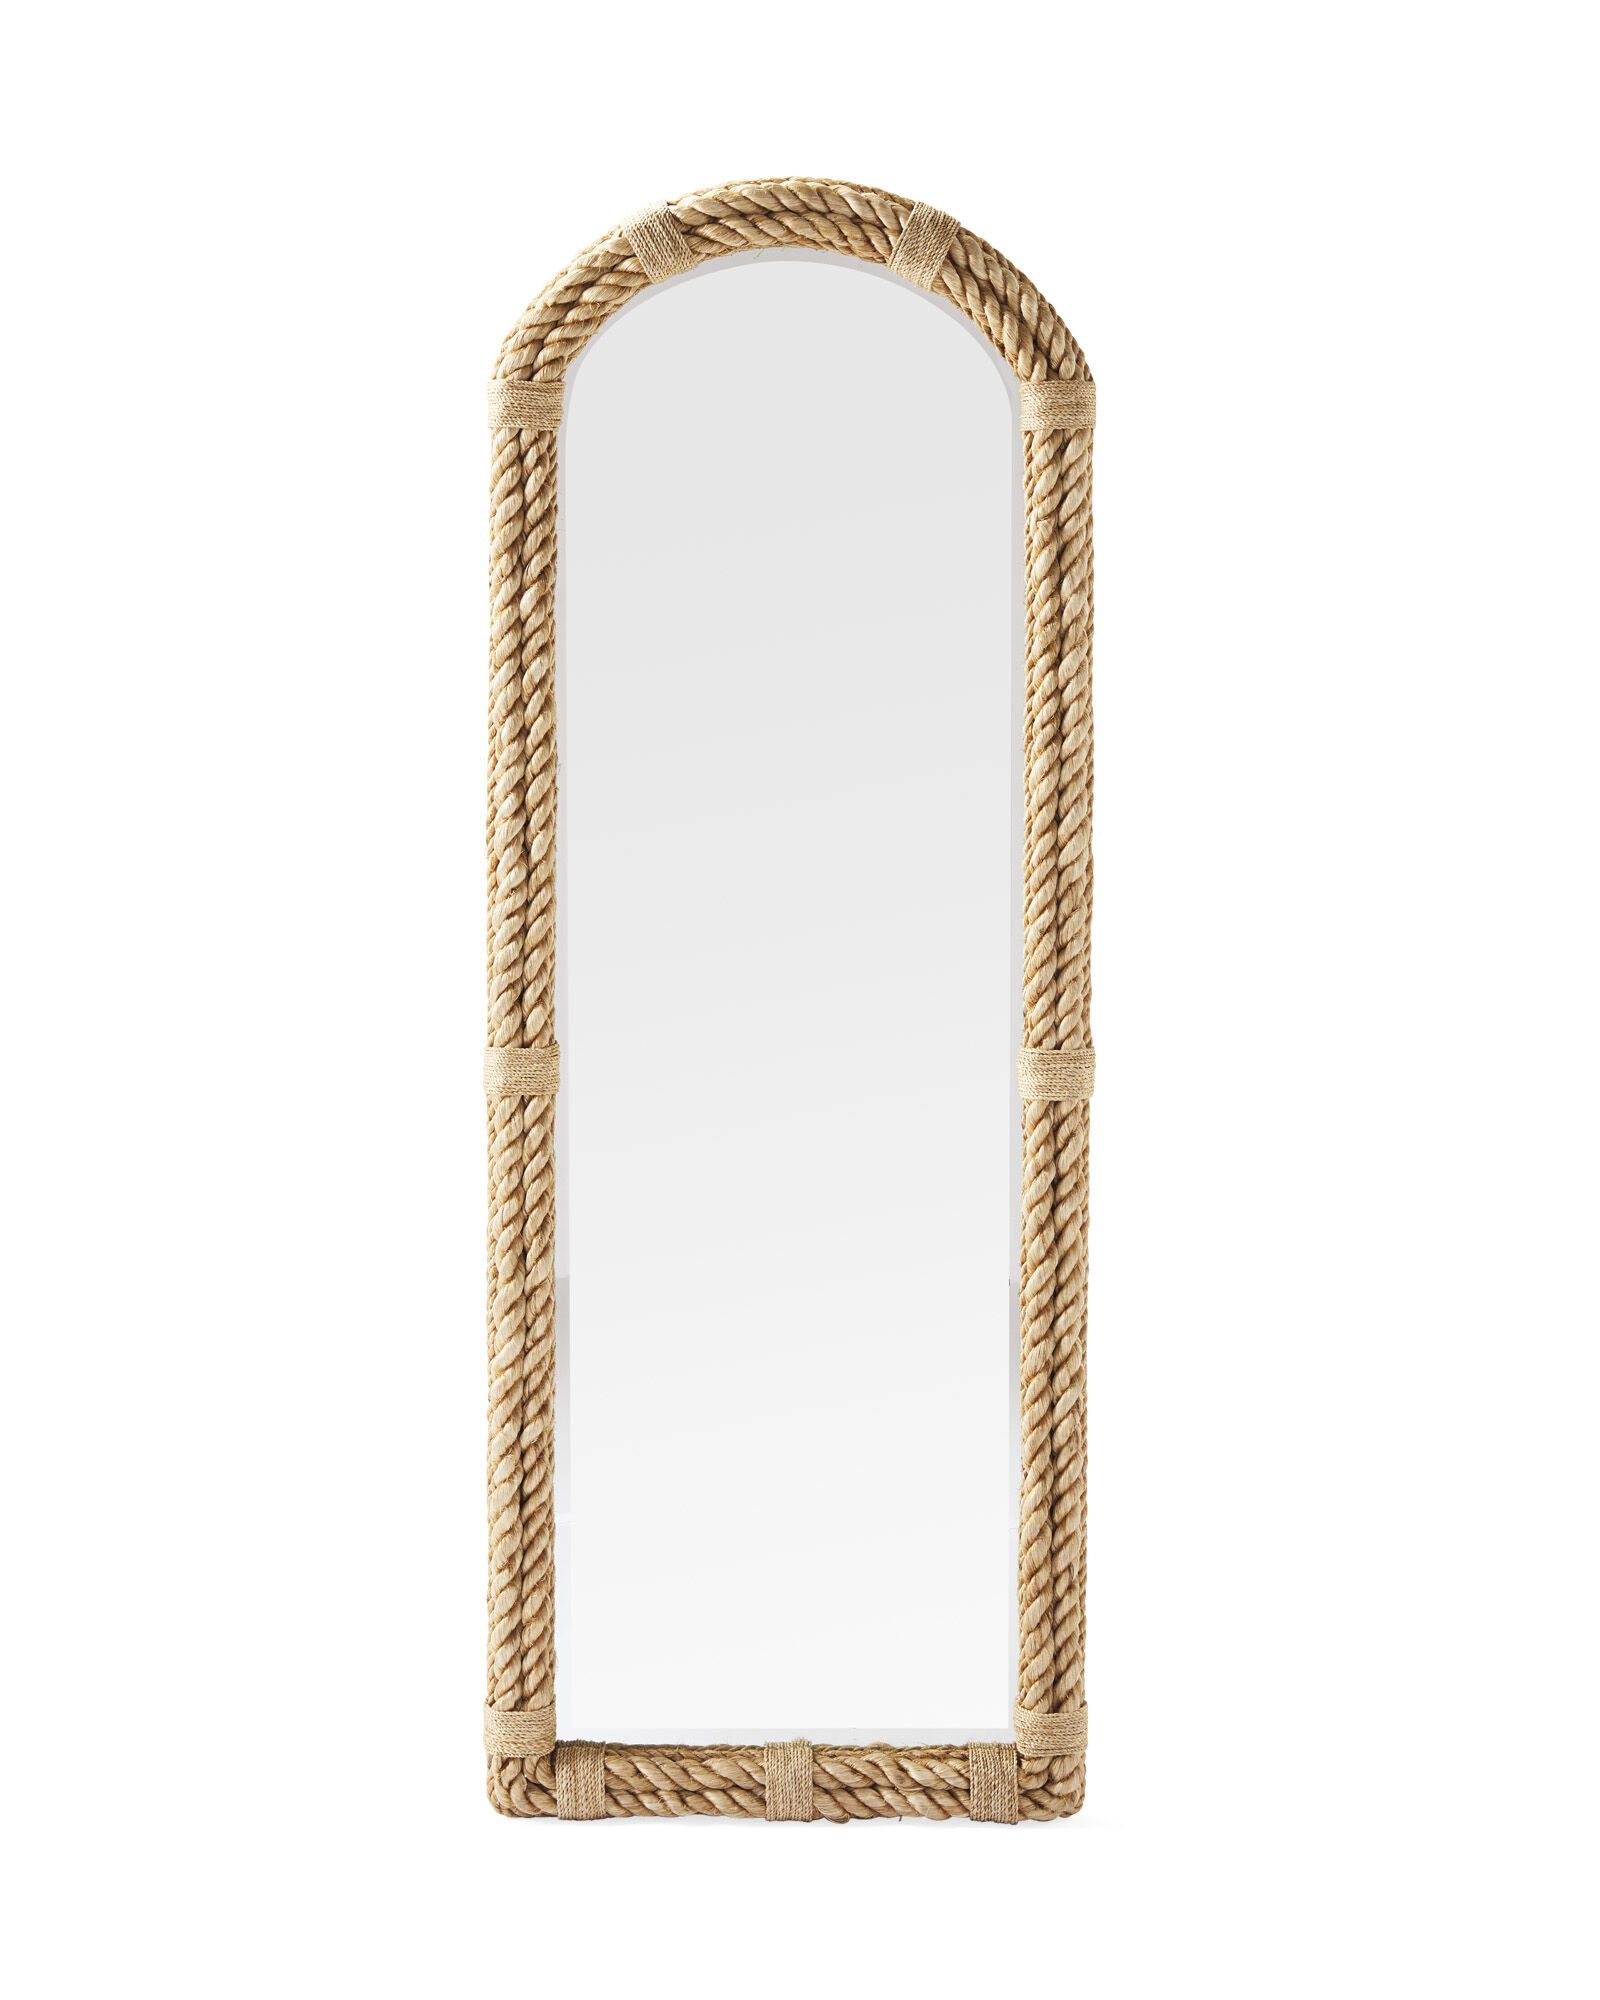 Nautical Rope Floor Mirror | Serena and Lily